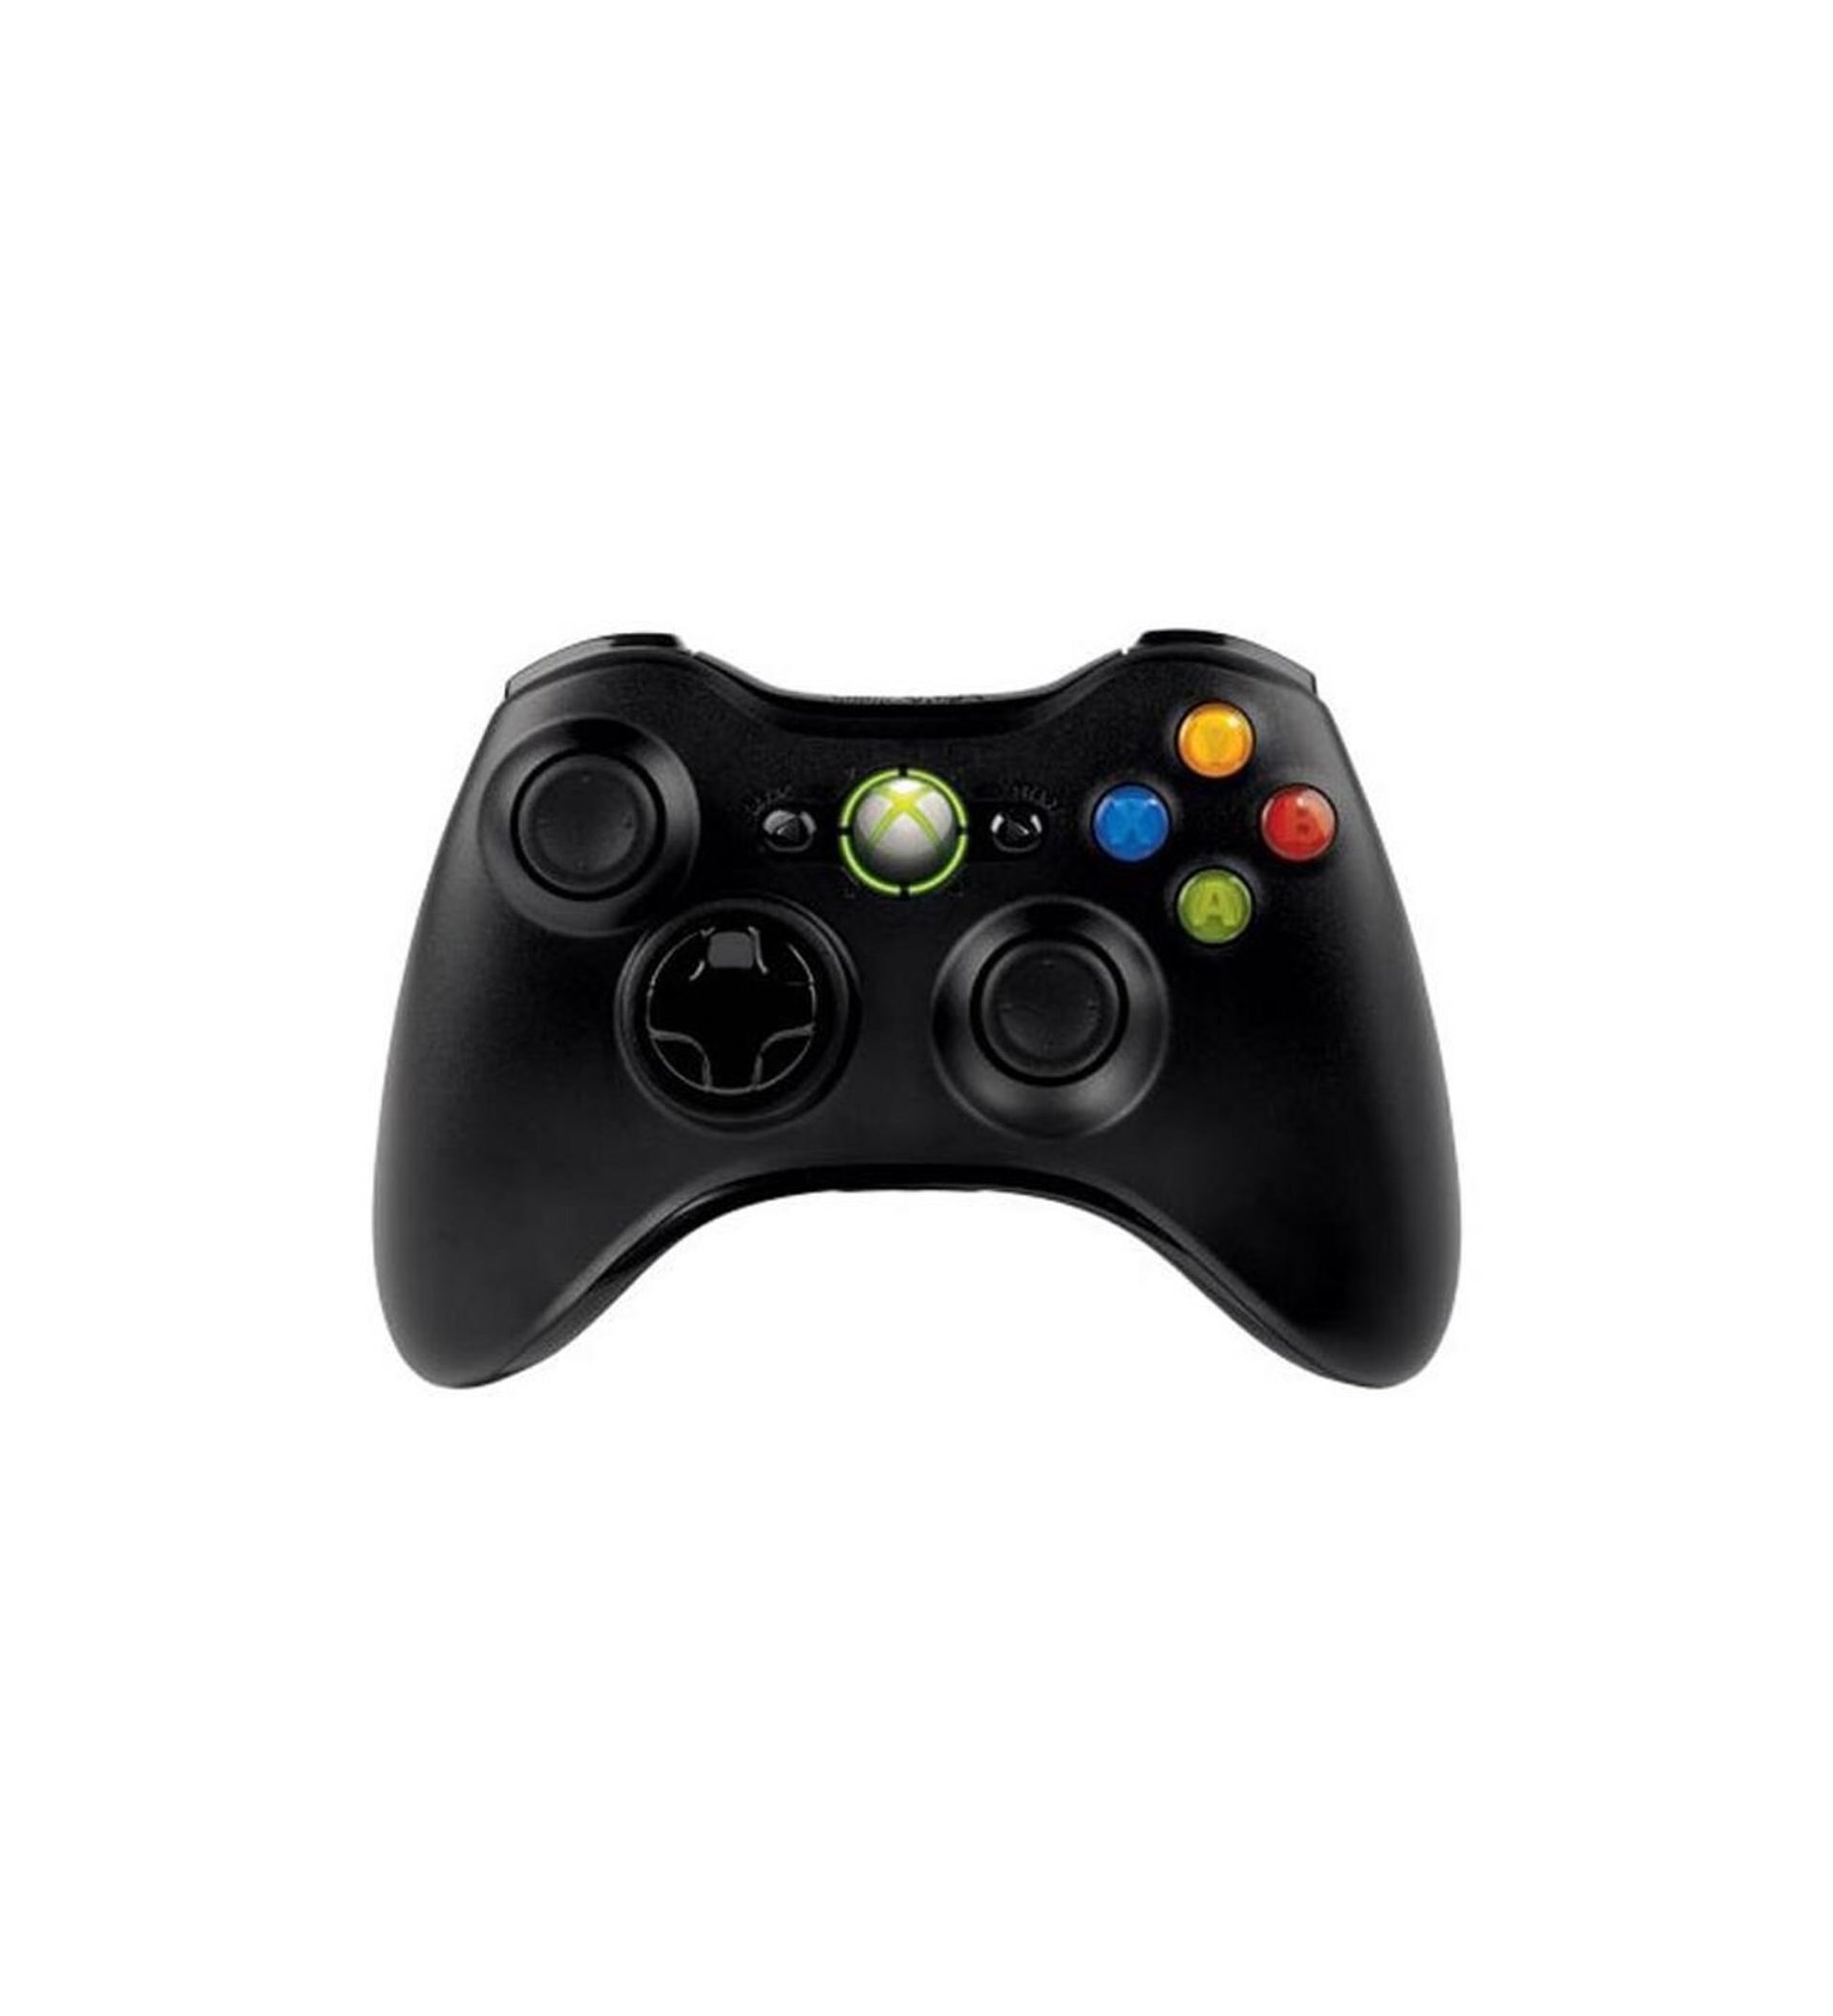 How to connect Xbox 360 controller to PC?